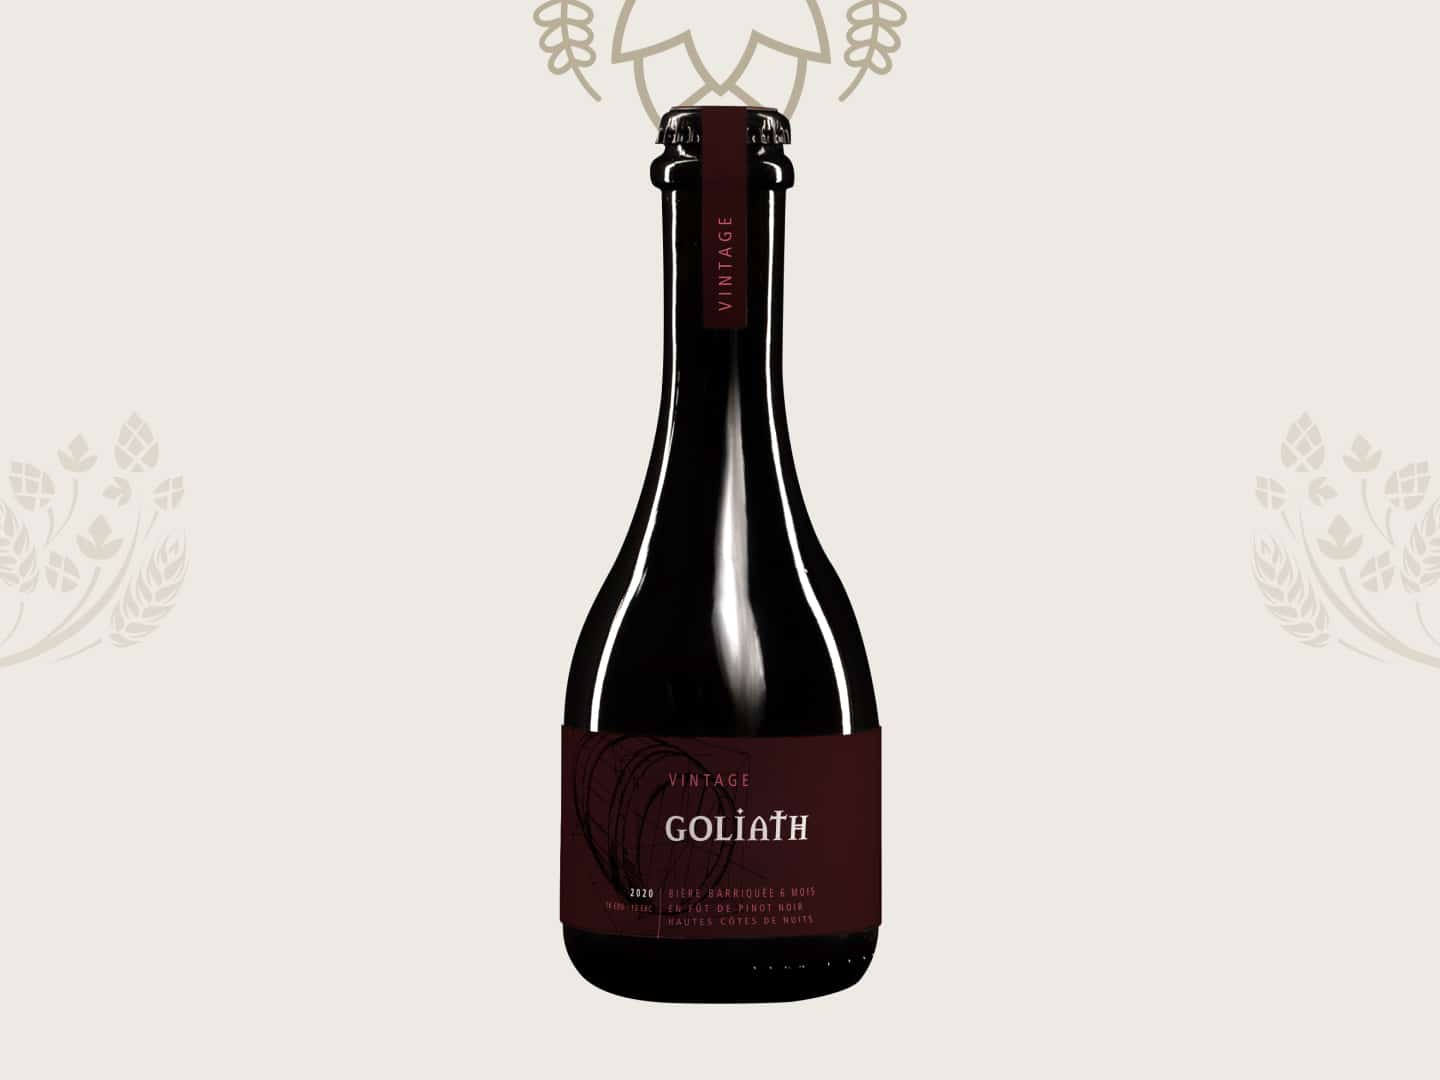 Discover our Goliath Blonde barred in Pinot Noir barrels